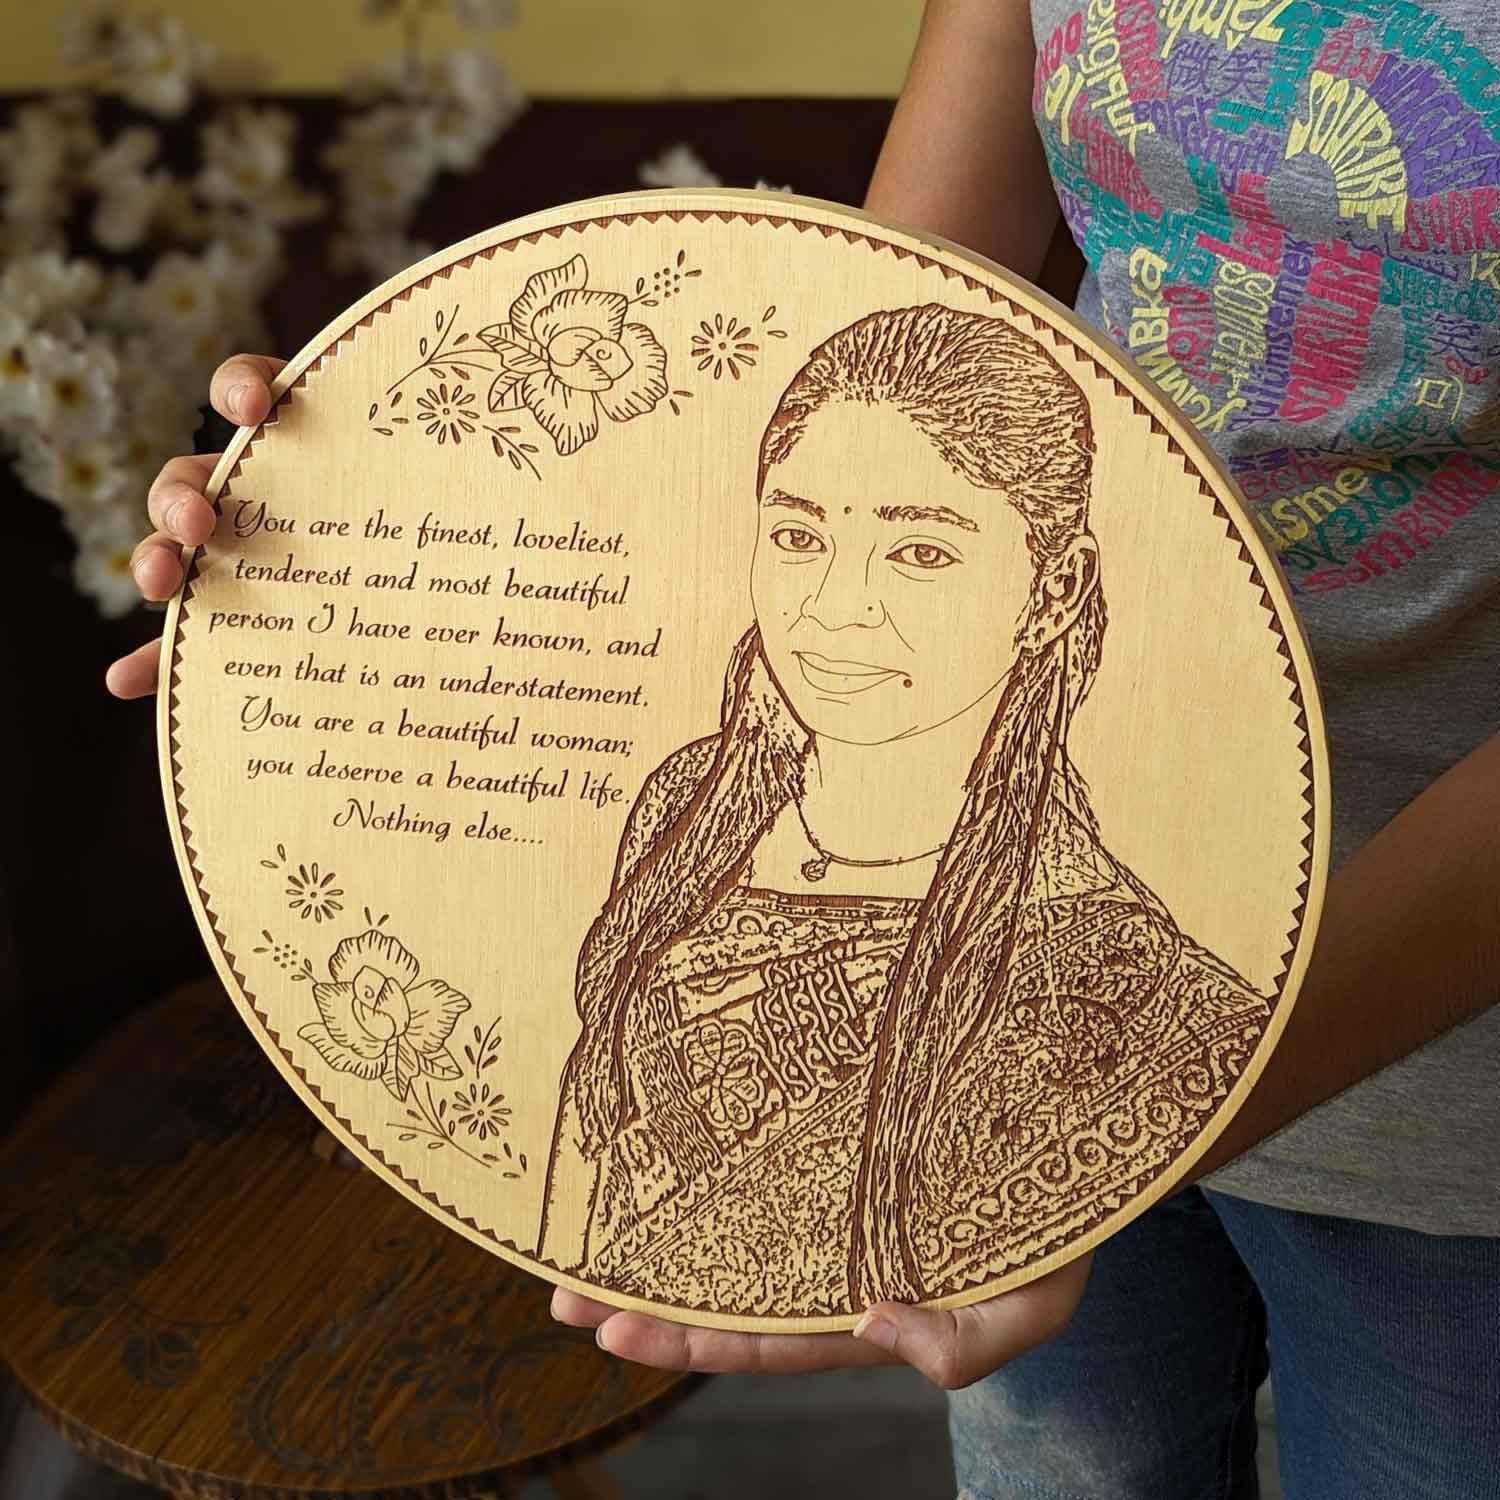 To the Most Beautiful Person I Know - A Personal Love Note Engraved On Wood